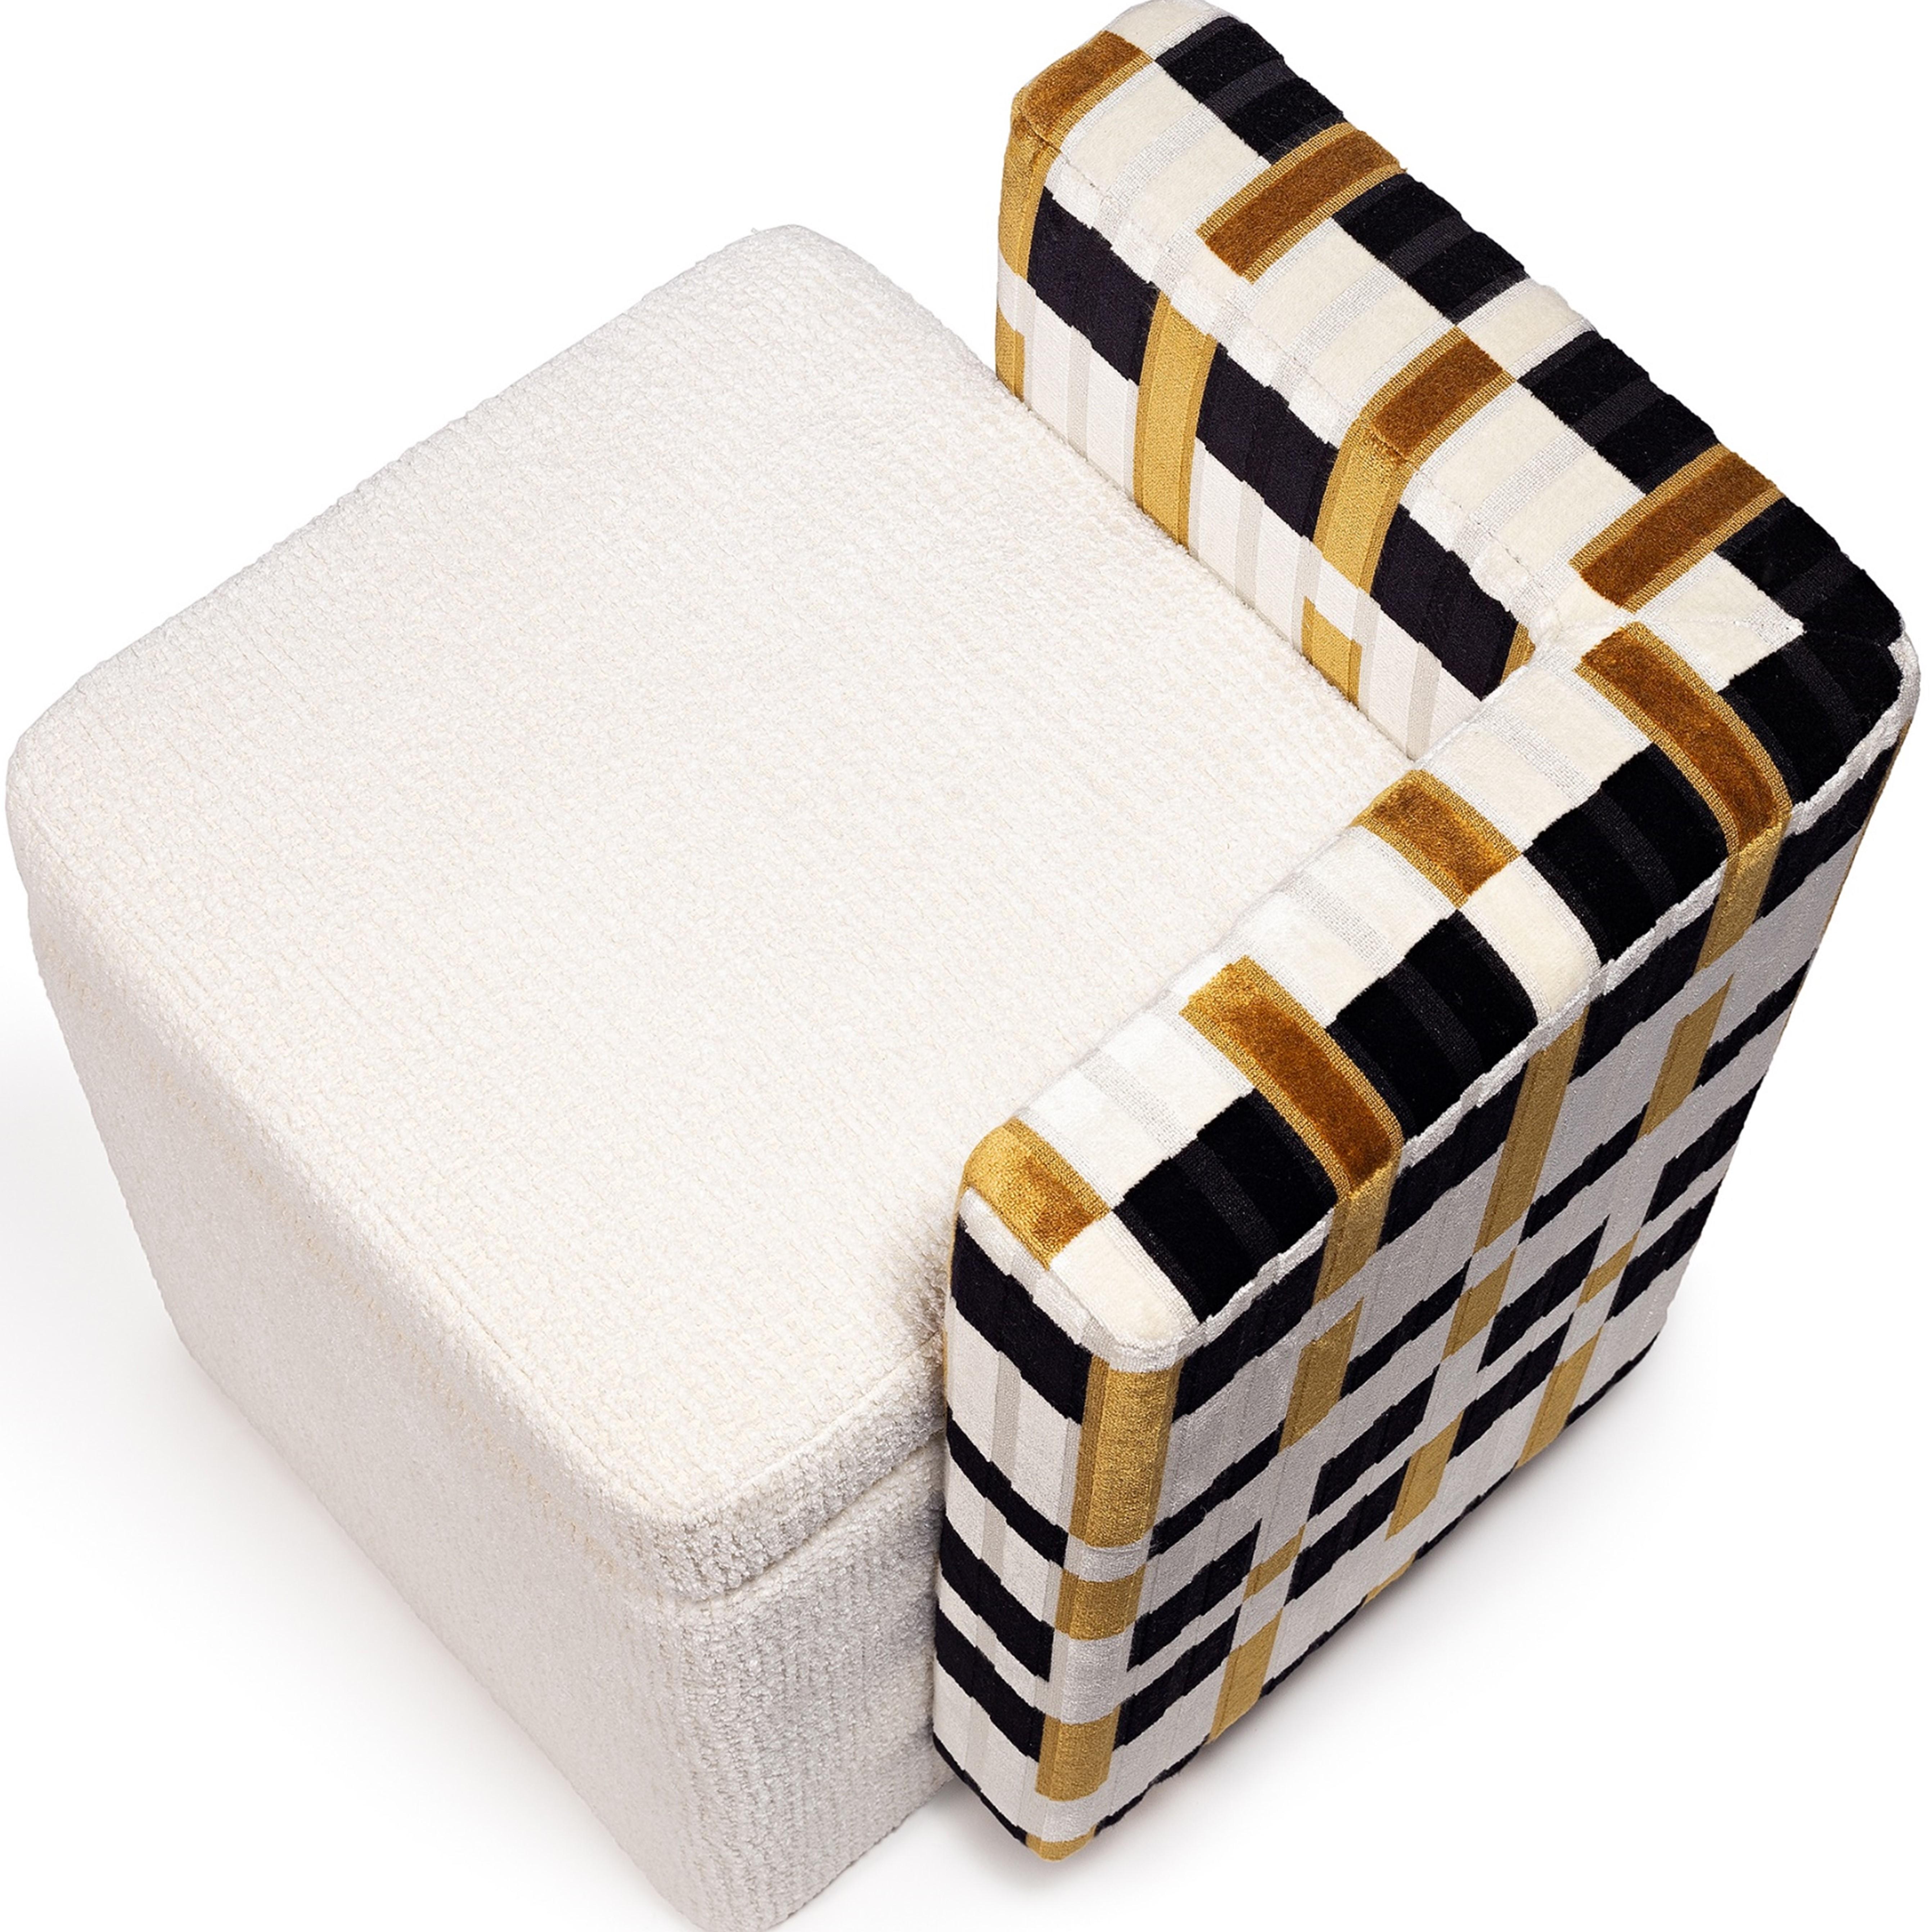 Hand-Crafted Not a Cube Stool, COM, InsidherLand by Joana Santos Barbosa For Sale